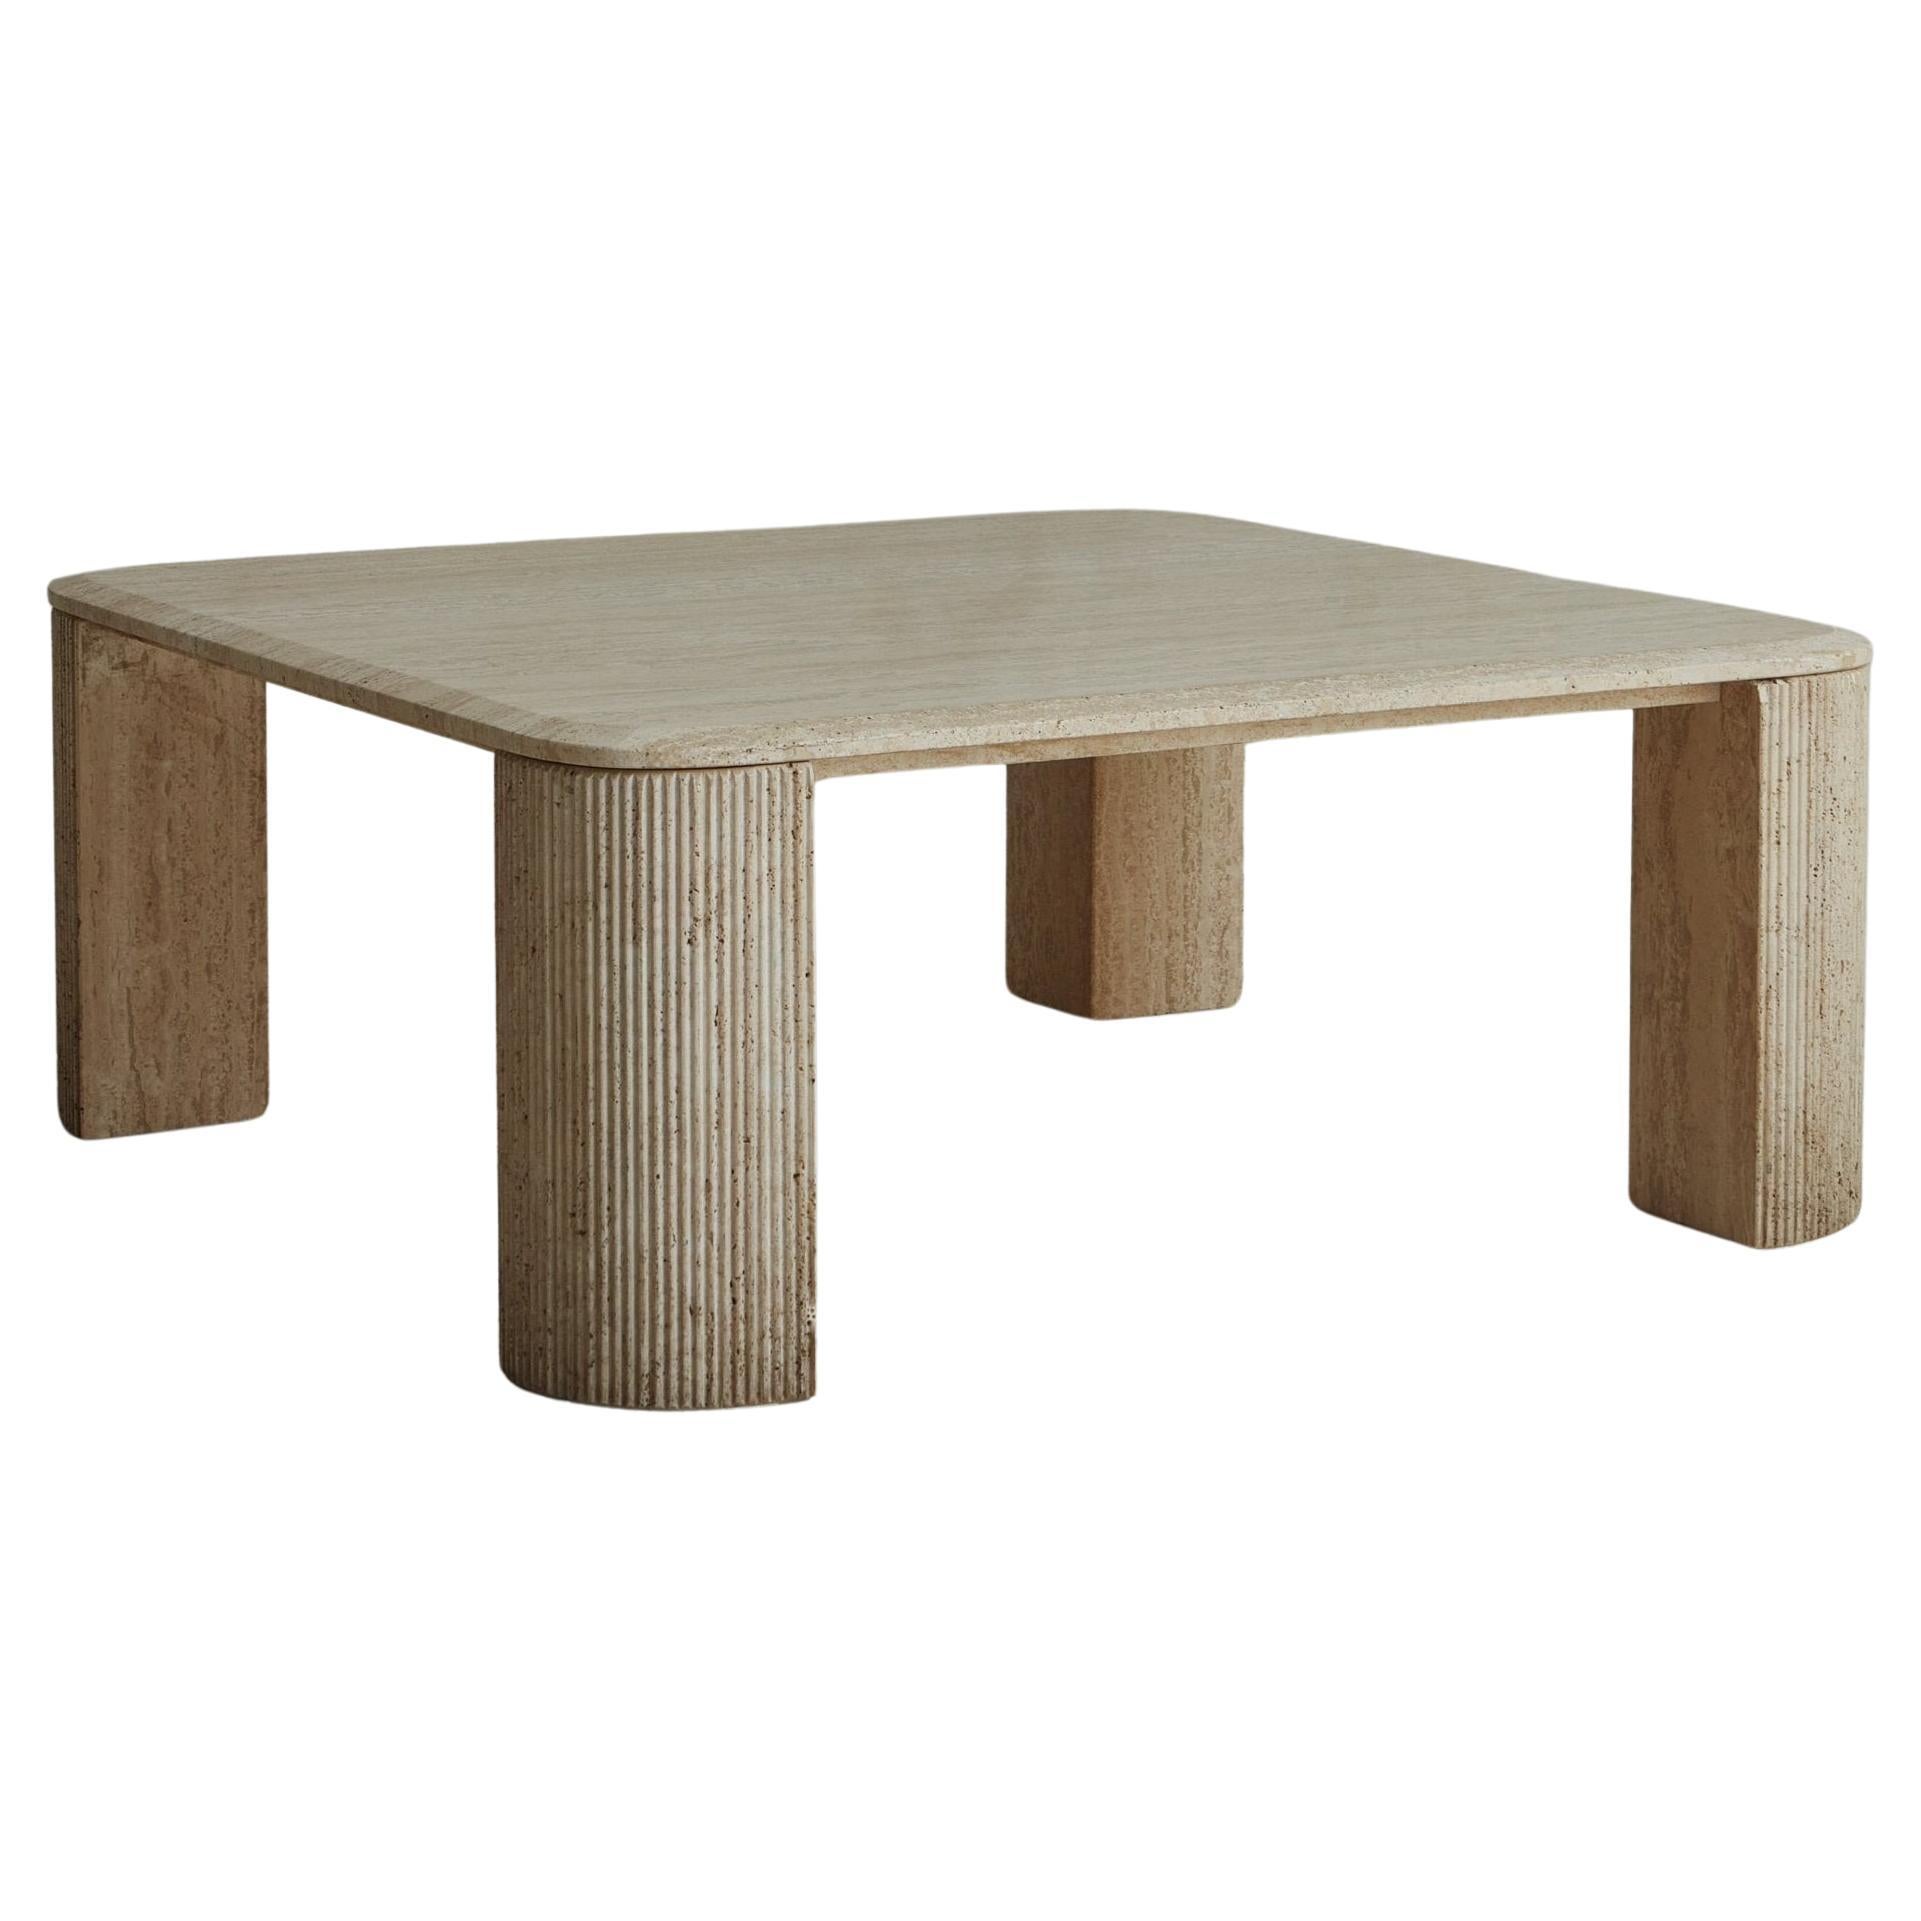 Square Travertine Coffee Table with Fluted Legs, Italy 20th Century For Sale